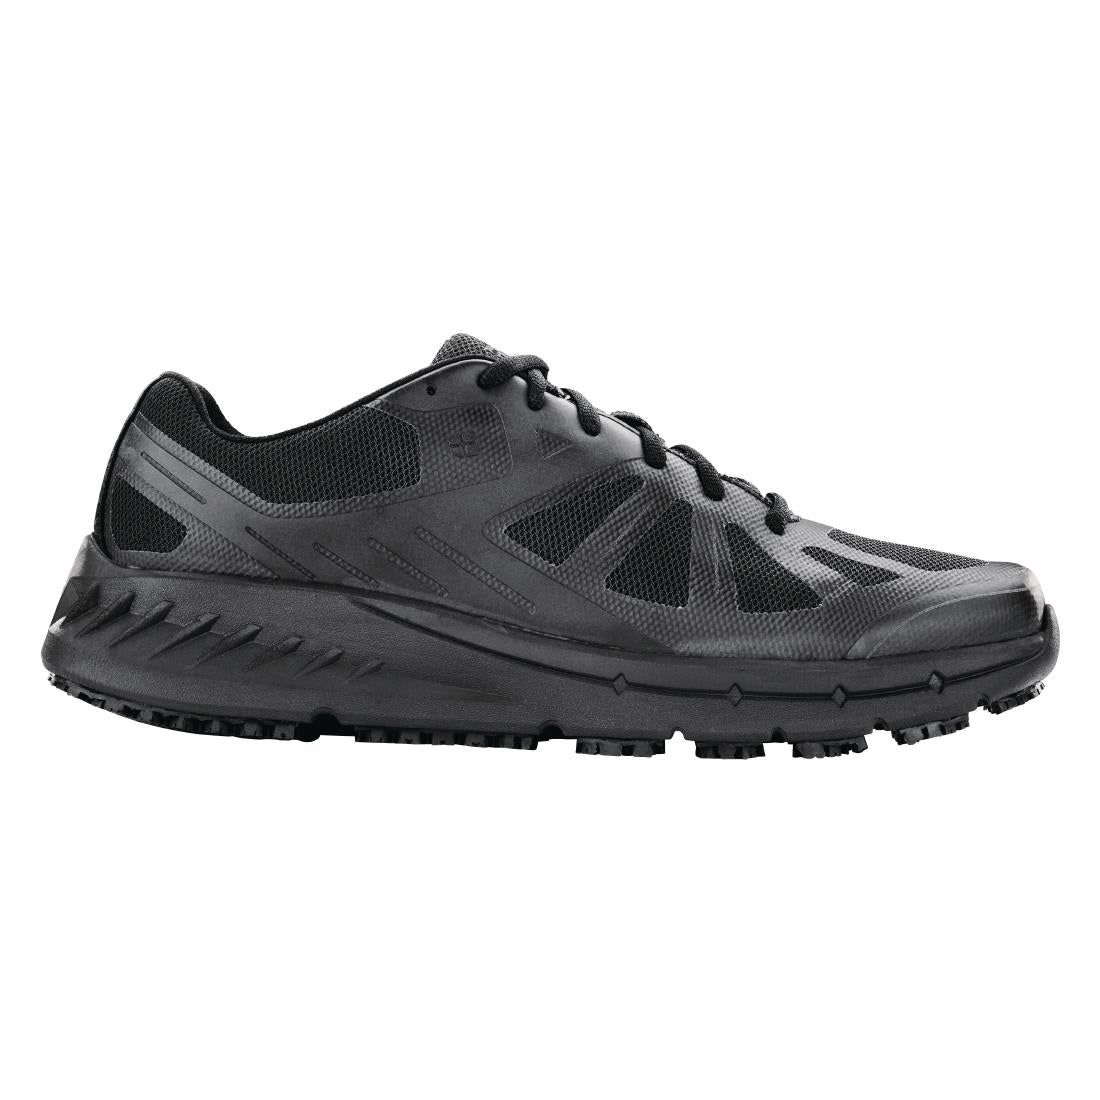 BB599-44 Shoes for Crews Endurance Trainers Black Size 44